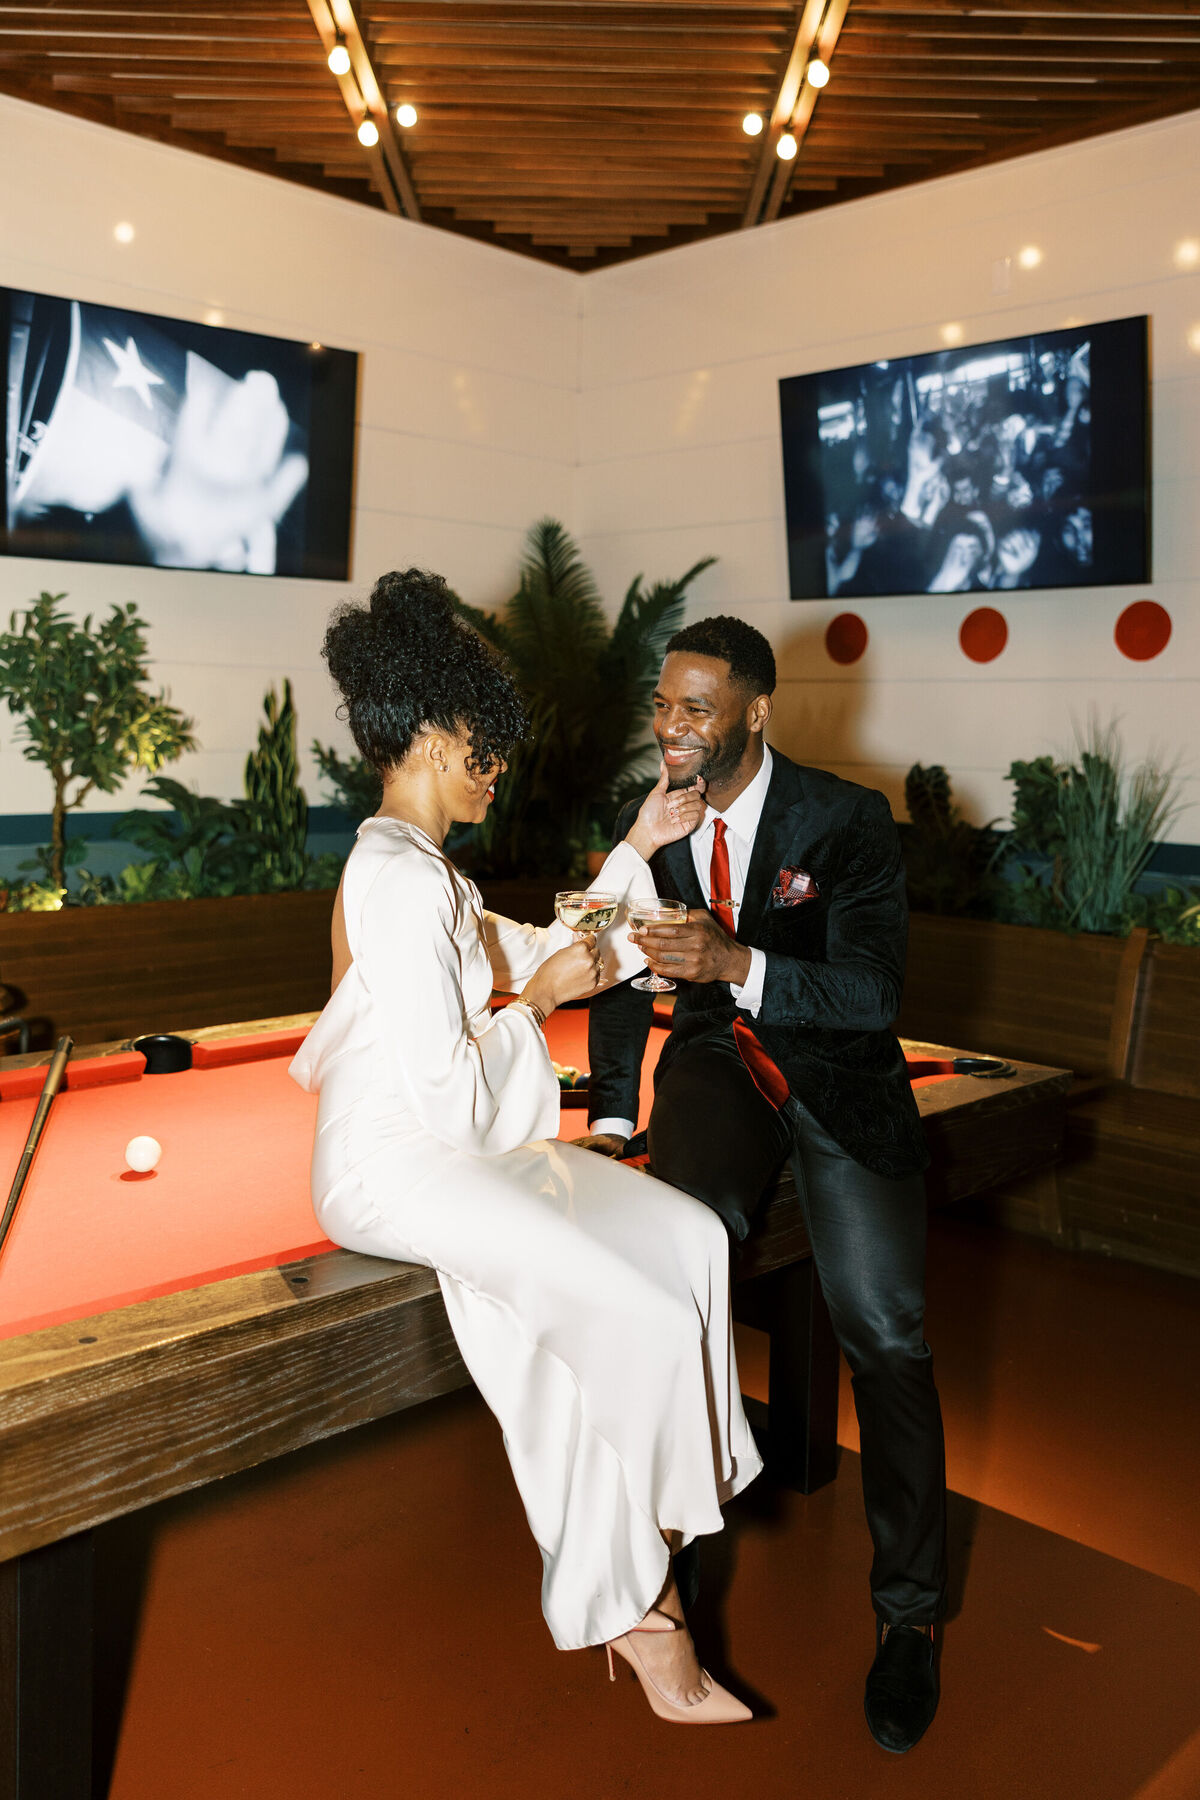 Bride and groom at billiards table